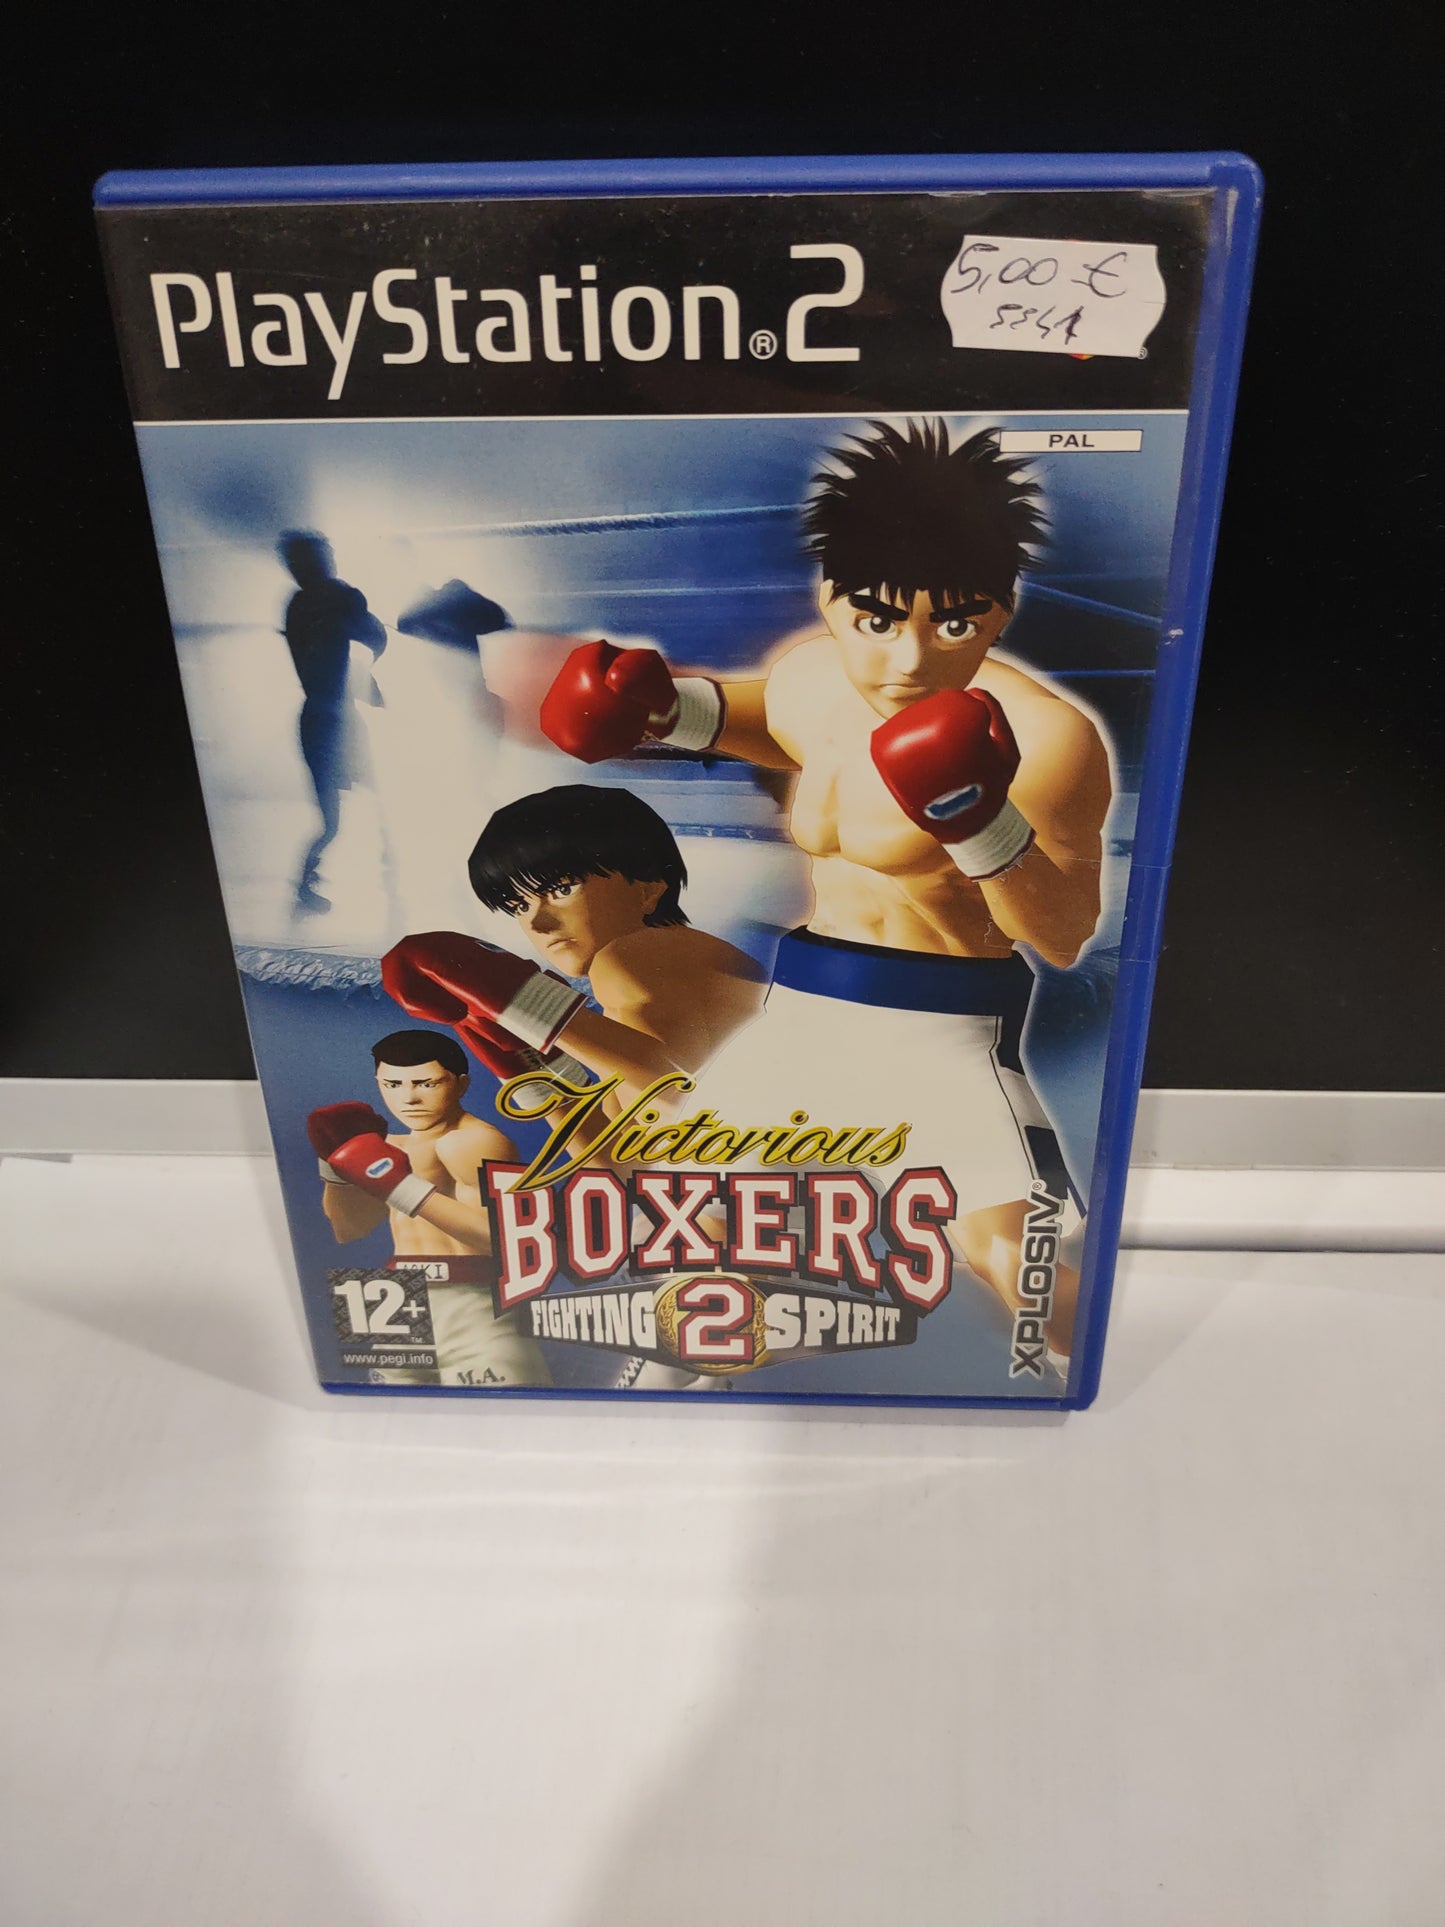 Gioco PS2 PlayStation Victorious boxers fighting Spirit 2